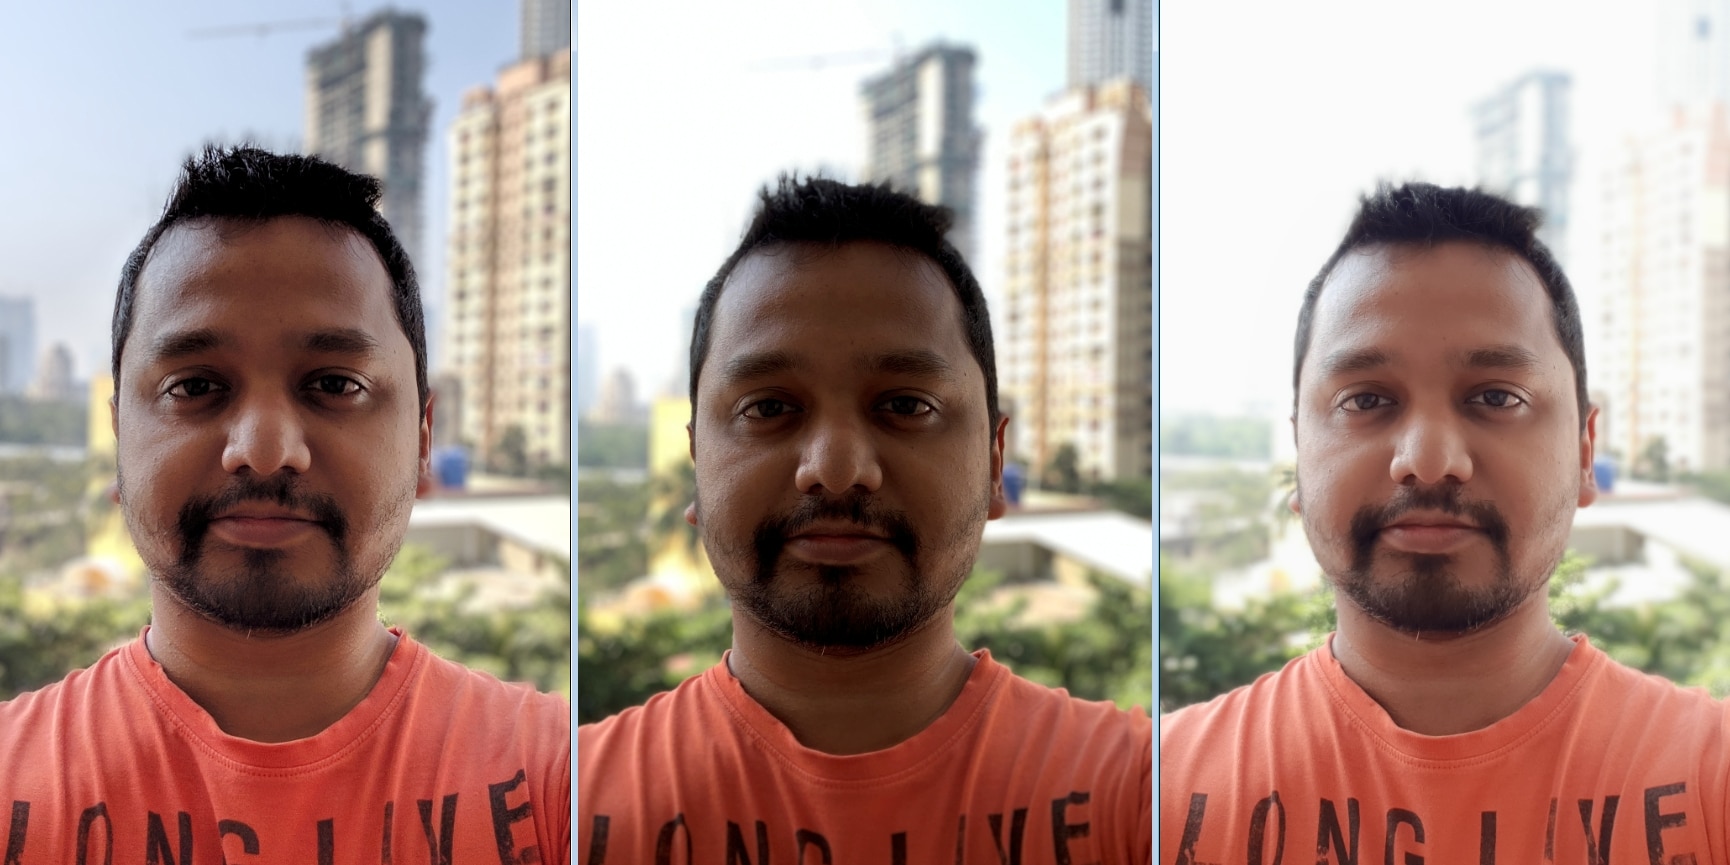 Pixel 3 XL, XS Max, NOte 9 L:R. Synthetic Fill Flash manages to perfectly expose the face, even in Portrait selfie against a bright background. Image: tech2/Sheldon Pinto.